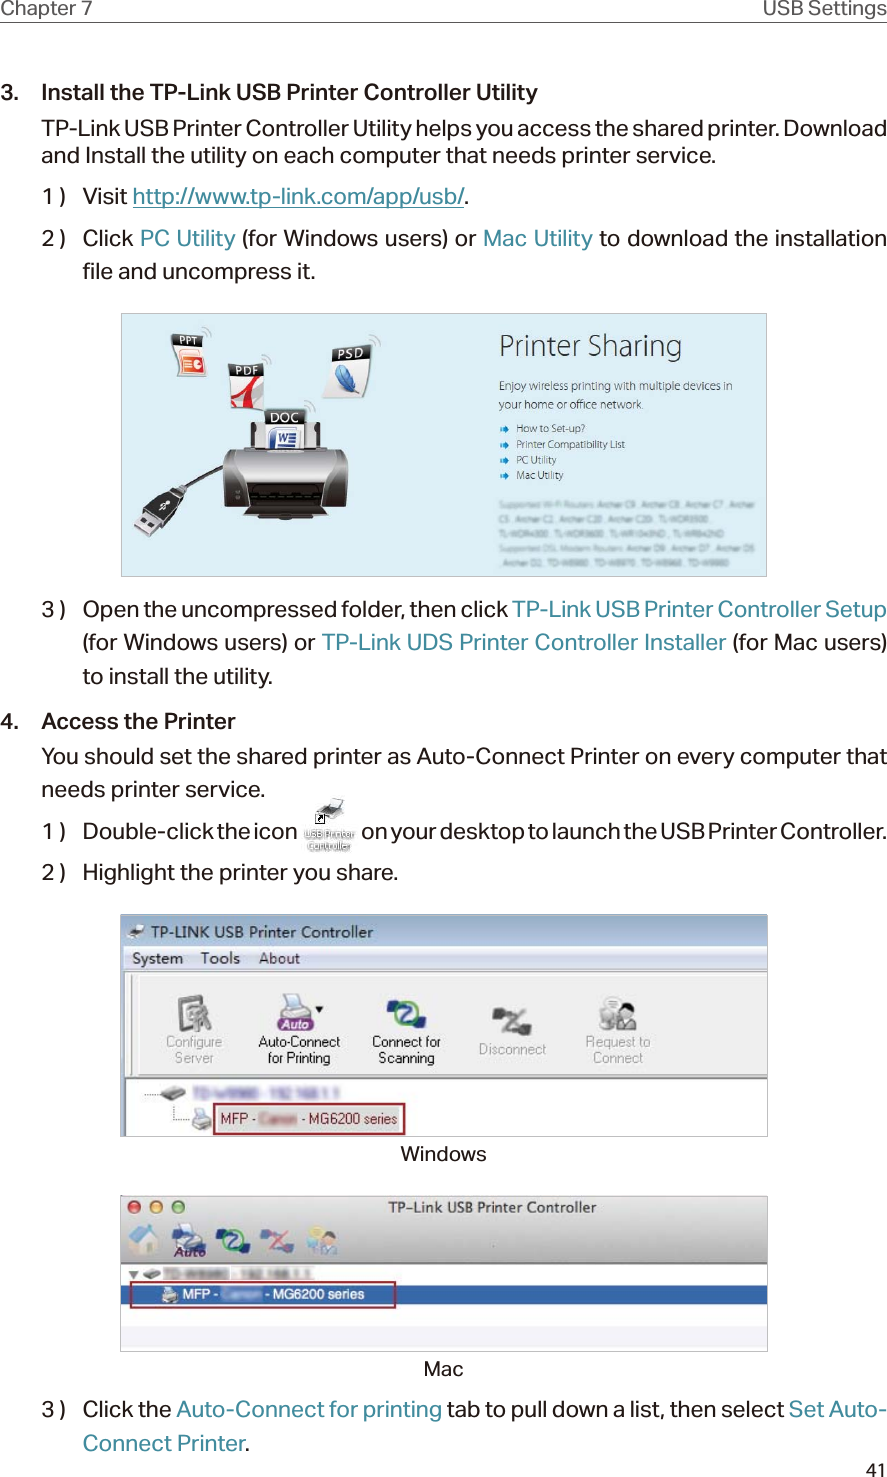 41Chapter 7 USB Settings3.  Install the TP-Link USB Printer Controller UtilityTP-Link USB Printer Controller Utility helps you access the shared printer. Download and Install the utility on each computer that needs printer service.1 )  Visit http://www.tp-link.com/app/usb/.2 )  Click PC Utility (for Windows users) or Mac Utility to download the installation file and uncompress it.3 )  Open the uncompressed folder, then click TP-Link USB Printer Controller Setup (for Windows users) or TP-Link UDS Printer Controller Installer (for Mac users) to install the utility.4.  Access the PrinterYou should set the shared printer as Auto-Connect Printer on every computer that needs printer service.1  )  Double-click the icon   on your desktop to launch the USB Printer Controller.2 )  Highlight the printer you share.WindowsMac3 )  Click the Auto-Connect for printing tab to pull down a list, then select Set Auto-Connect Printer.